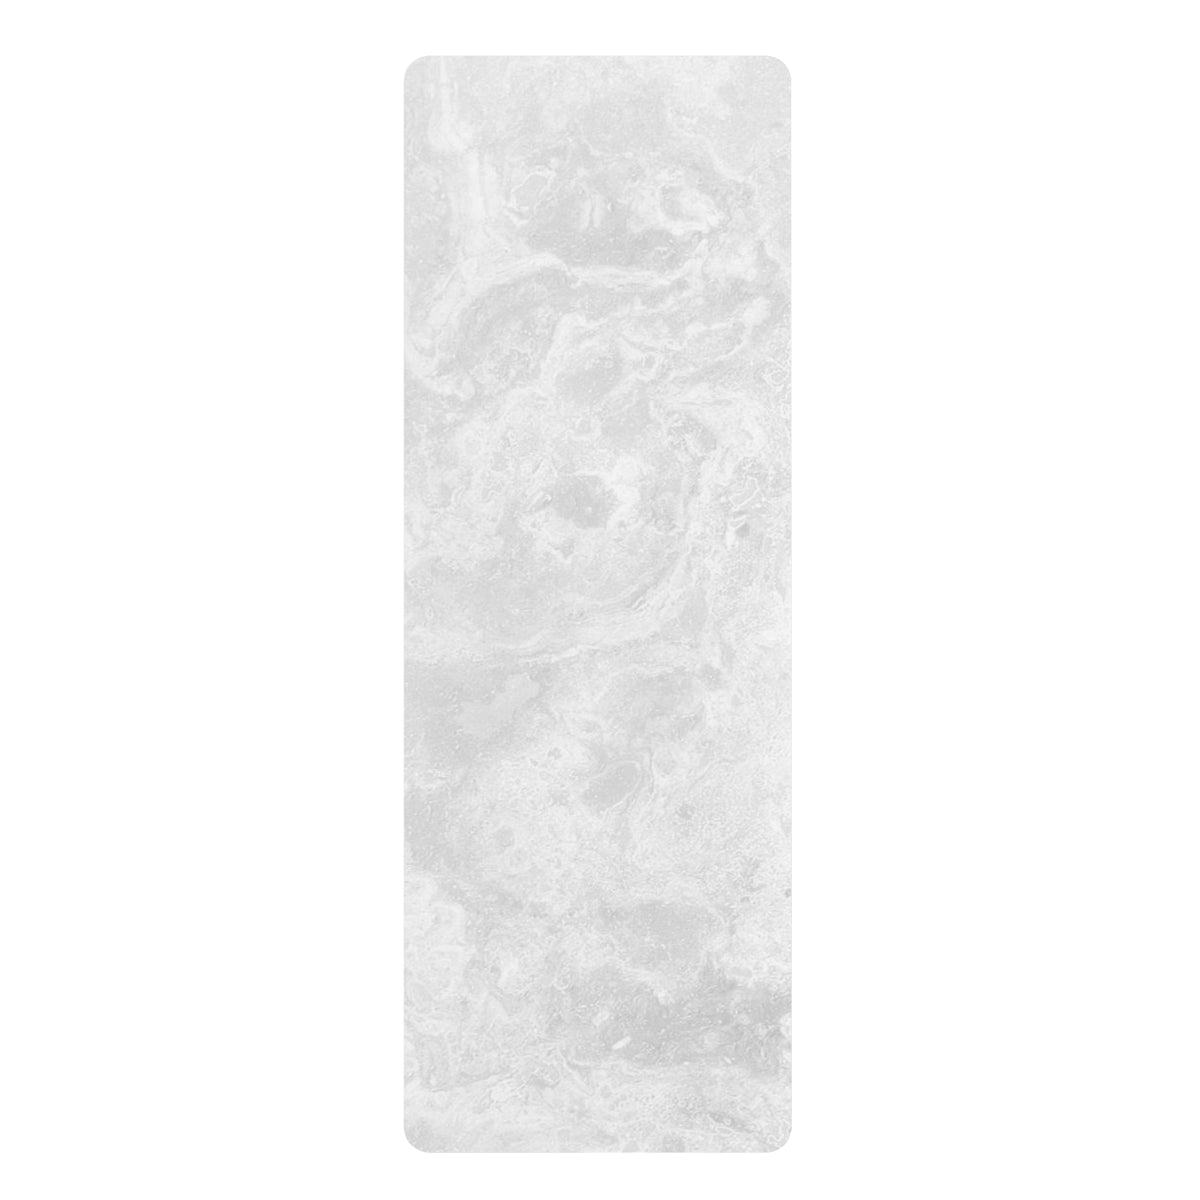 Marble Rubber Yoga Mat - FLOW FITTED